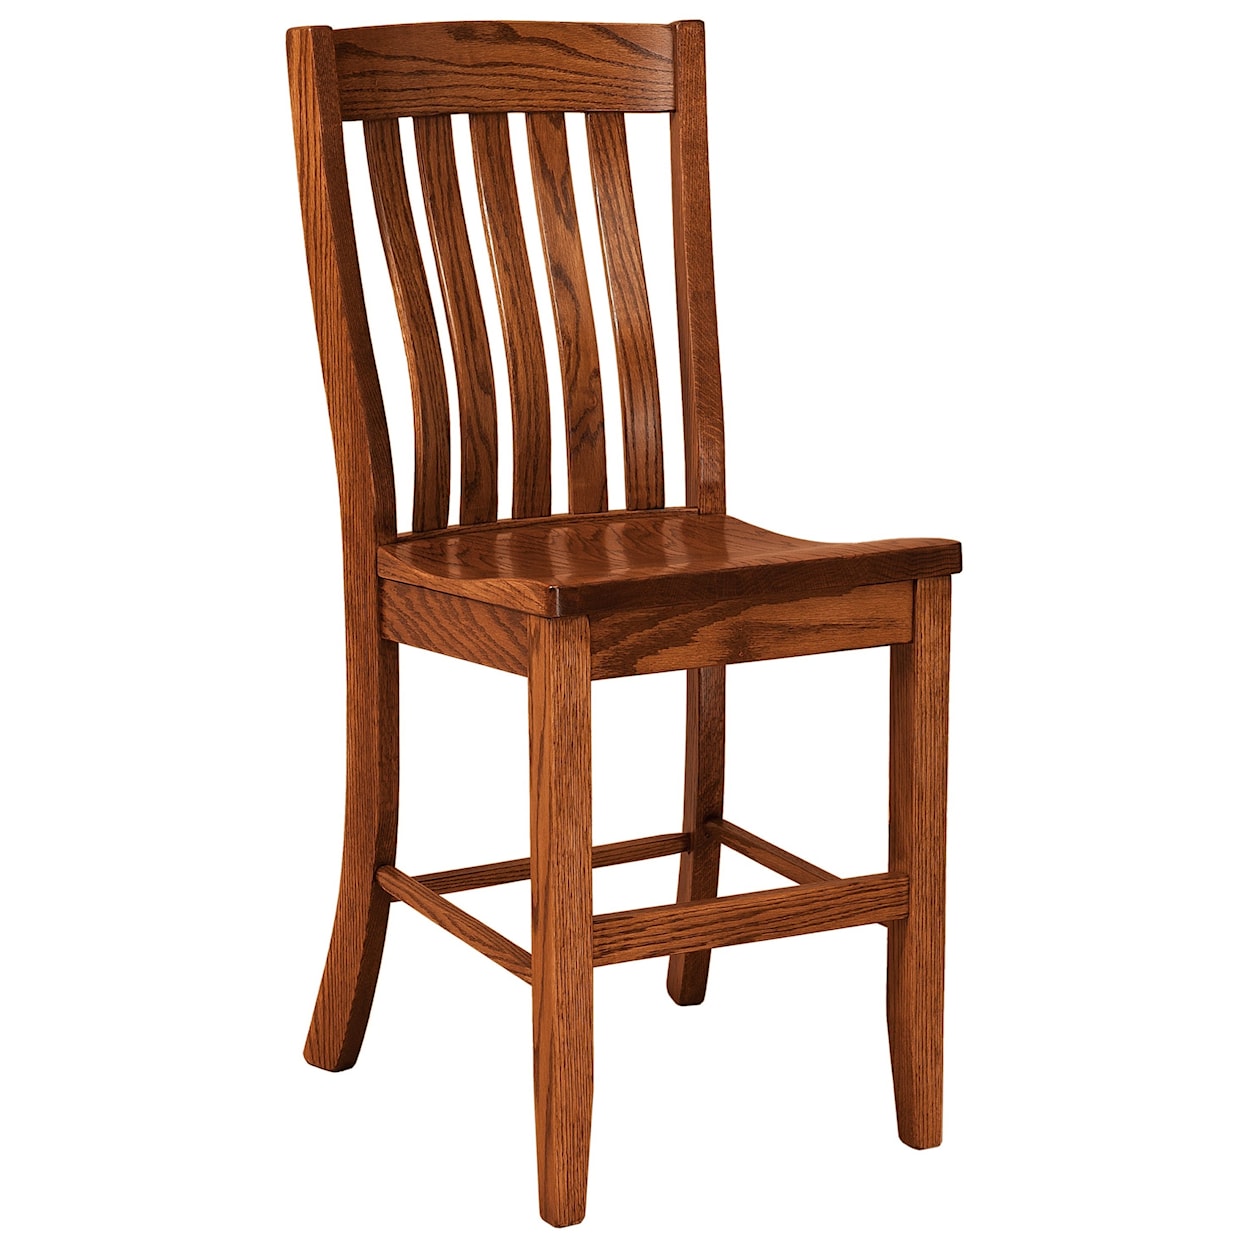 F&N Woodworking Houghton Stationary Counter Height Stool - Wood Seat